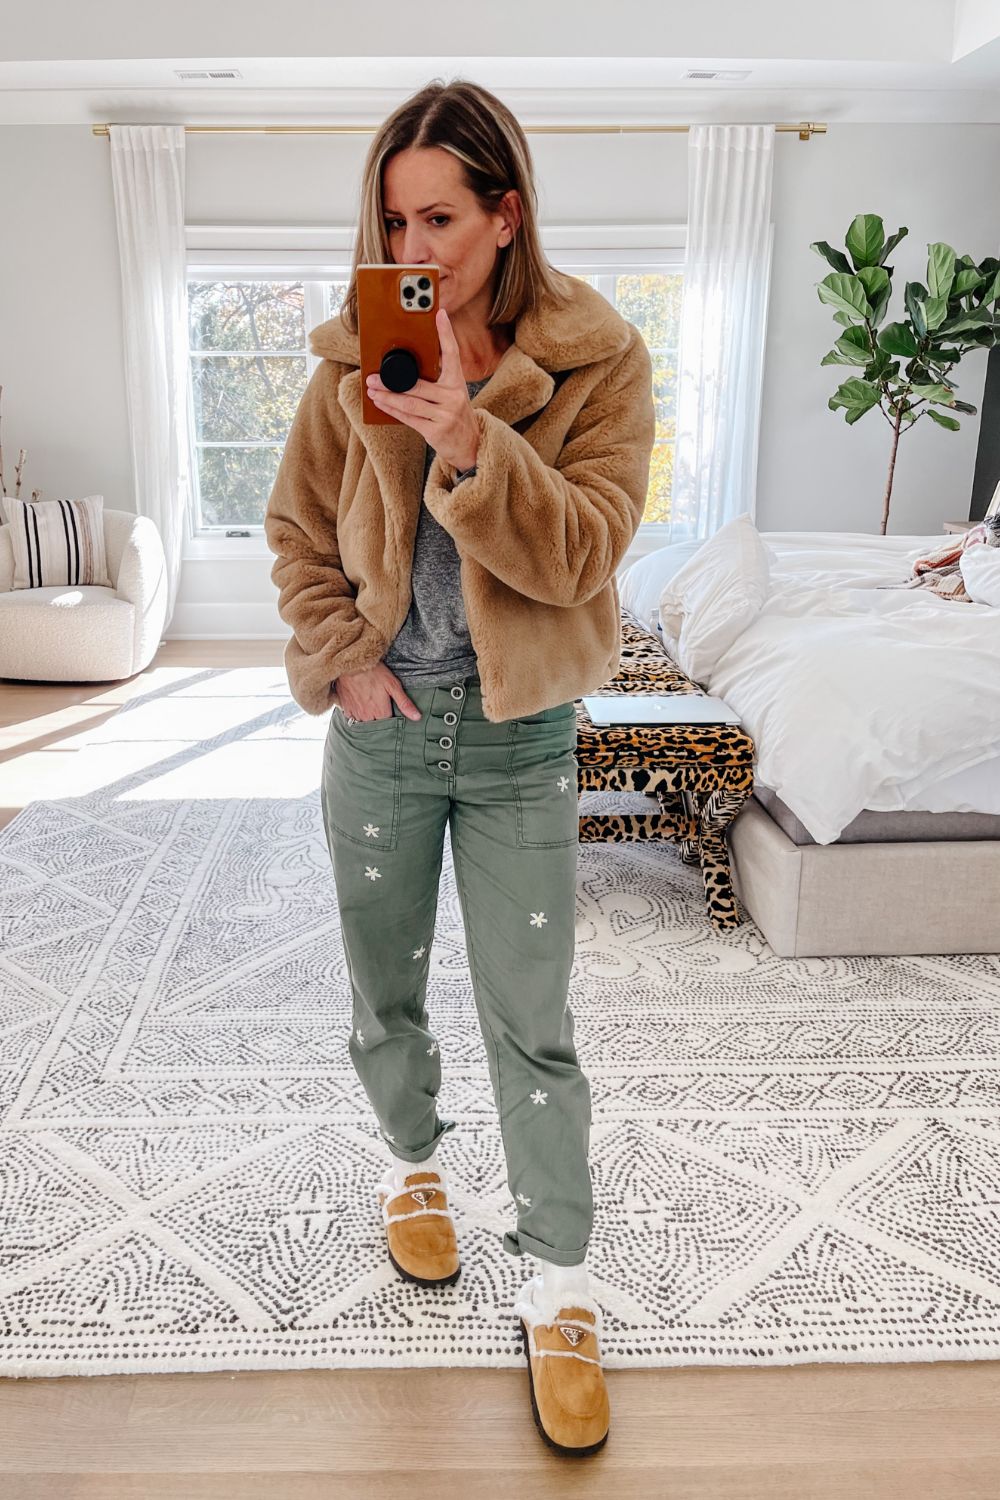 Suzanne wearing a faux fur jacket and Pistola trousers 